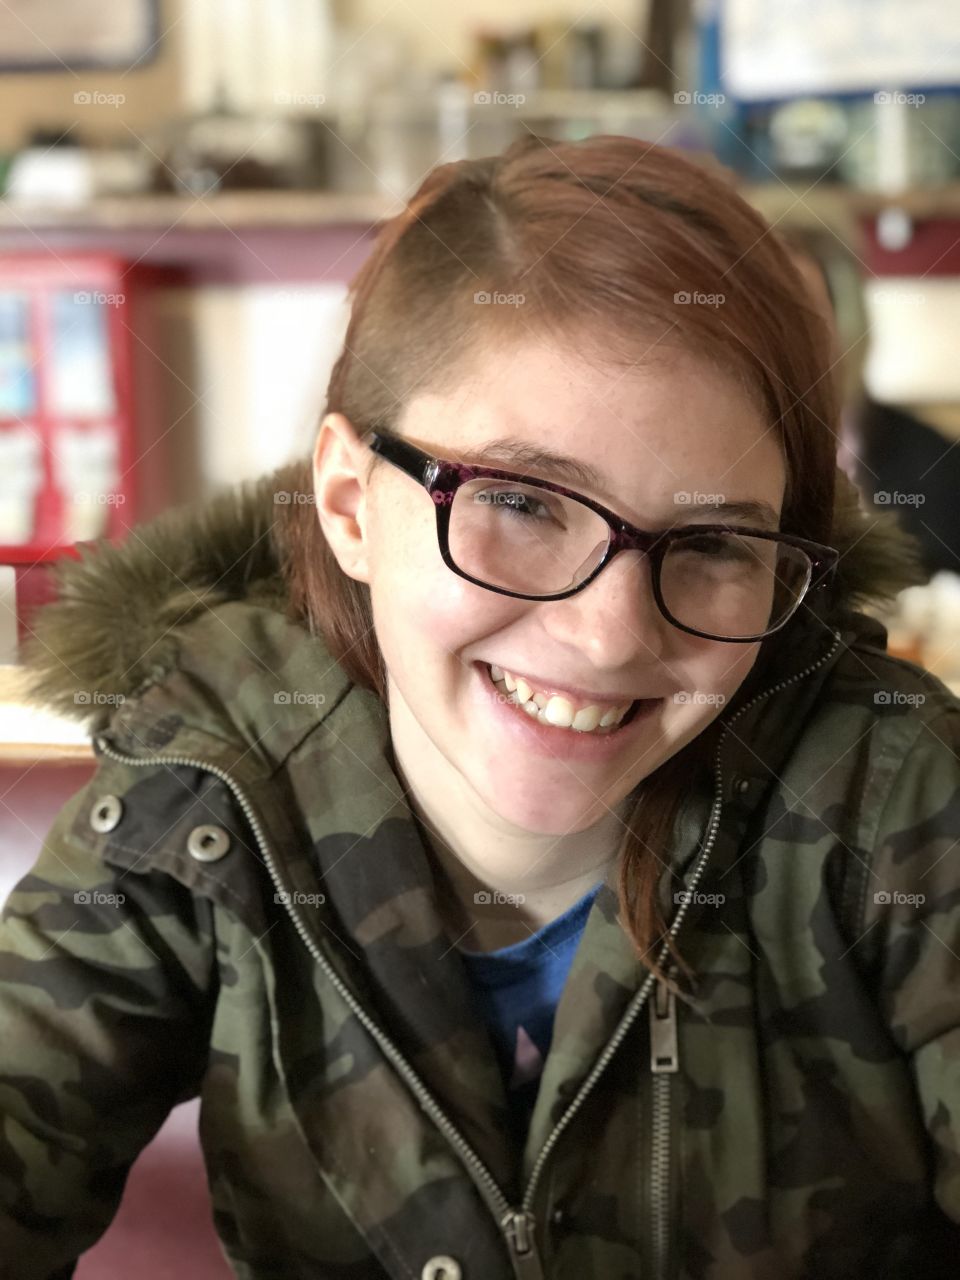 Smiling teenage girl wearing glasses, camouflage coat with fur and shaved haircut